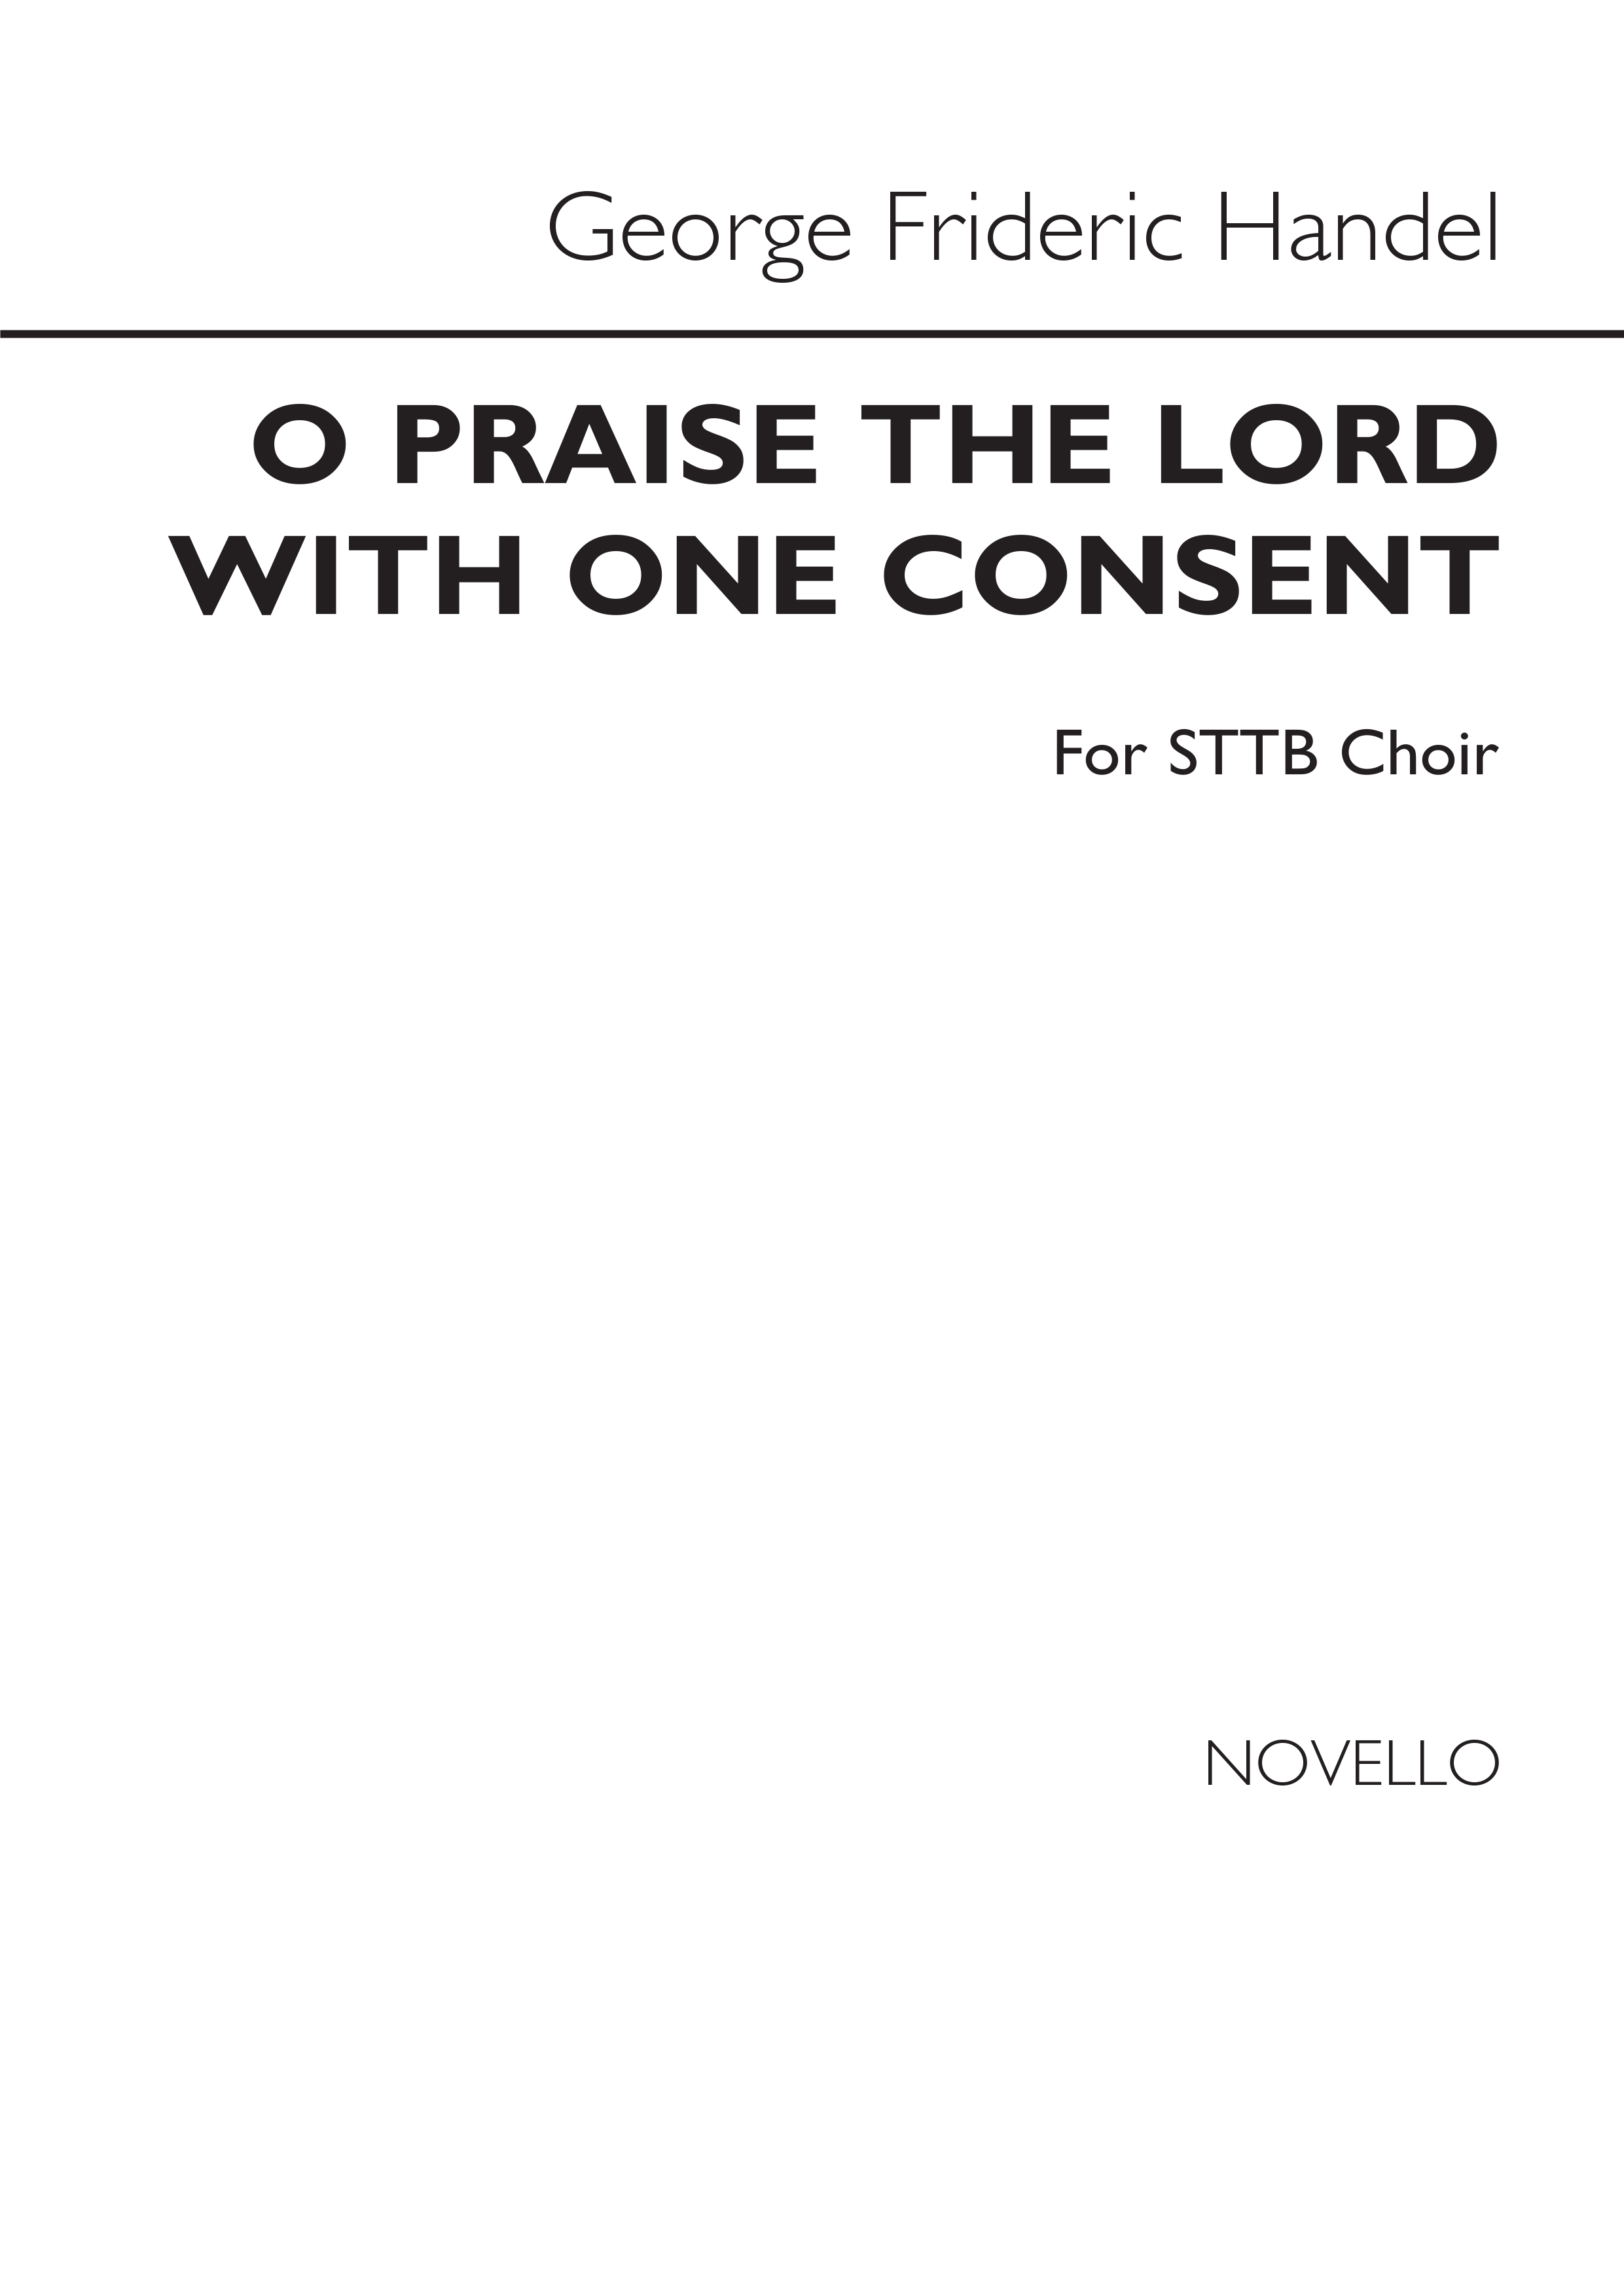 George Frideric Handel: O Praise The Lord With One Consent (STTB)